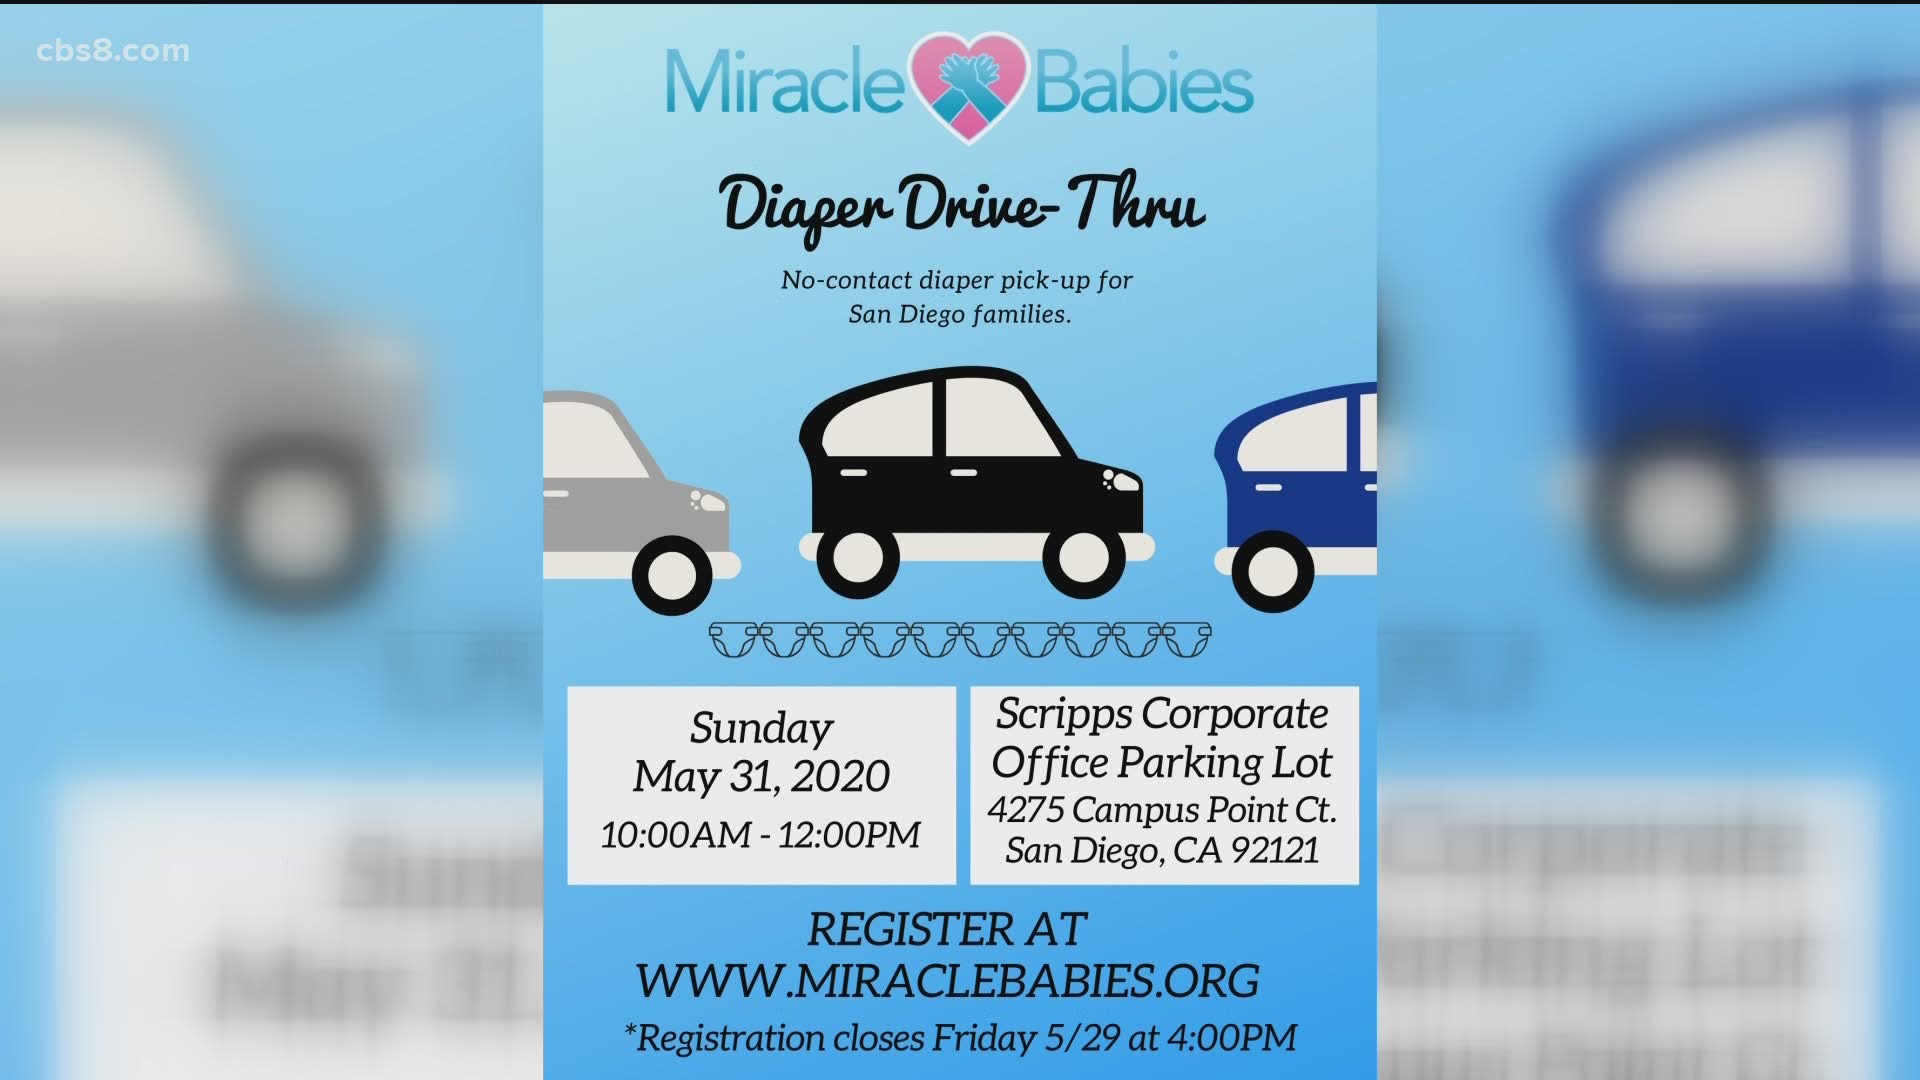 Chief Operations Officer at Miracle Babies, Marianella Camarillo joined Morning Extra to talk about what the non-profit does and how you can get free diapers.